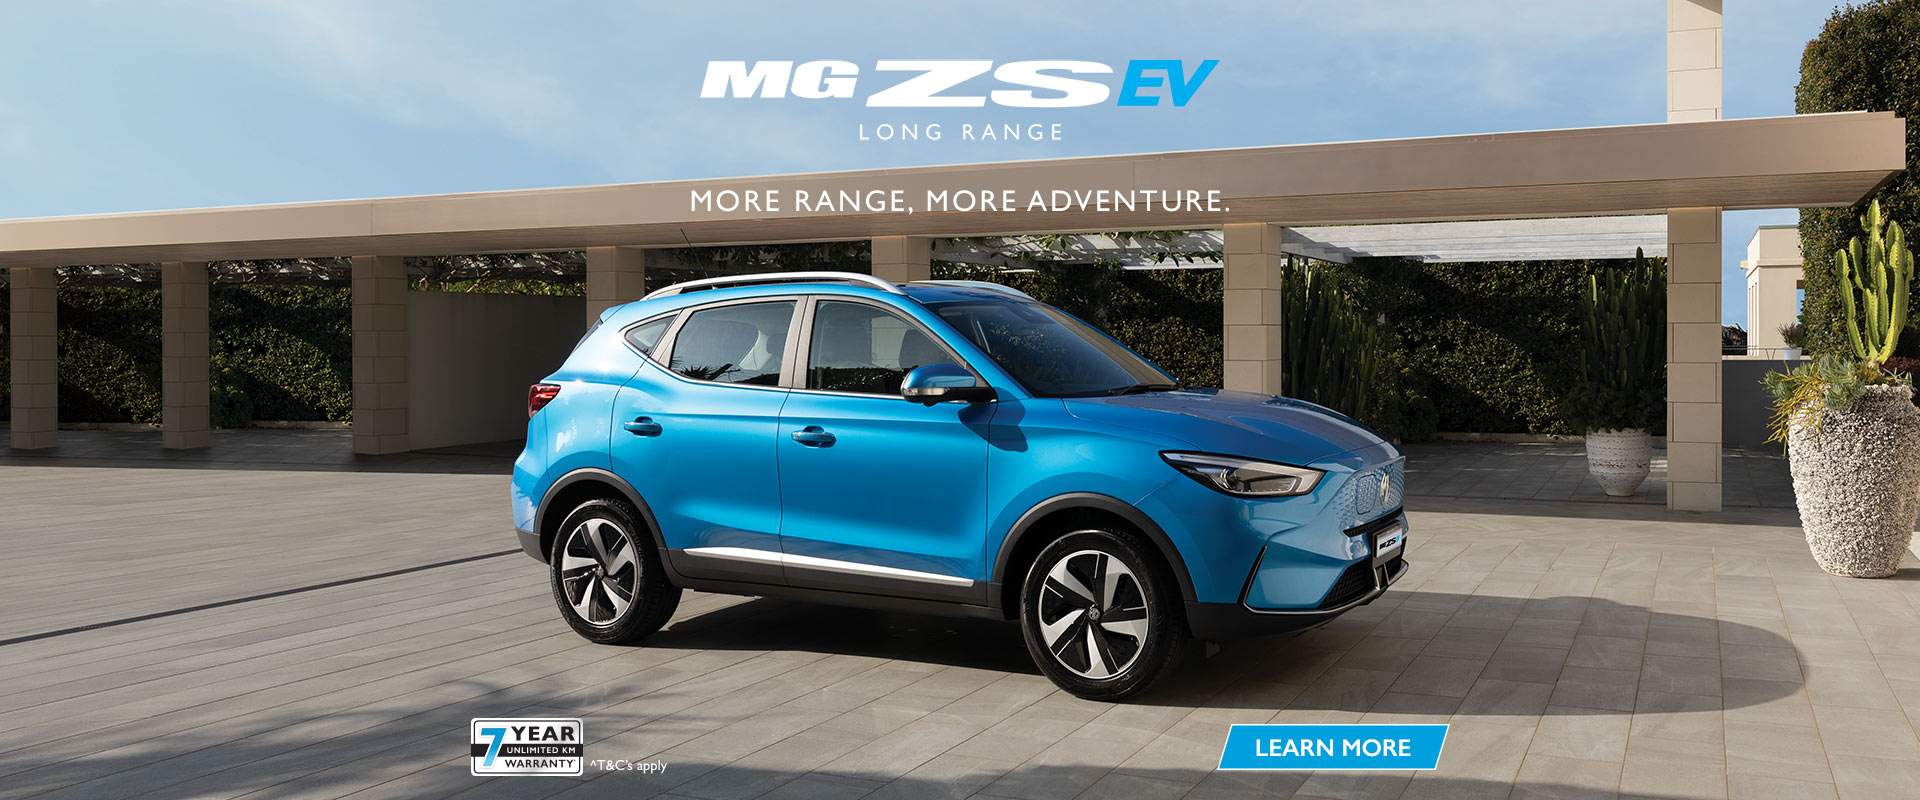 MG ZS EV EV Now Easy. Learn More